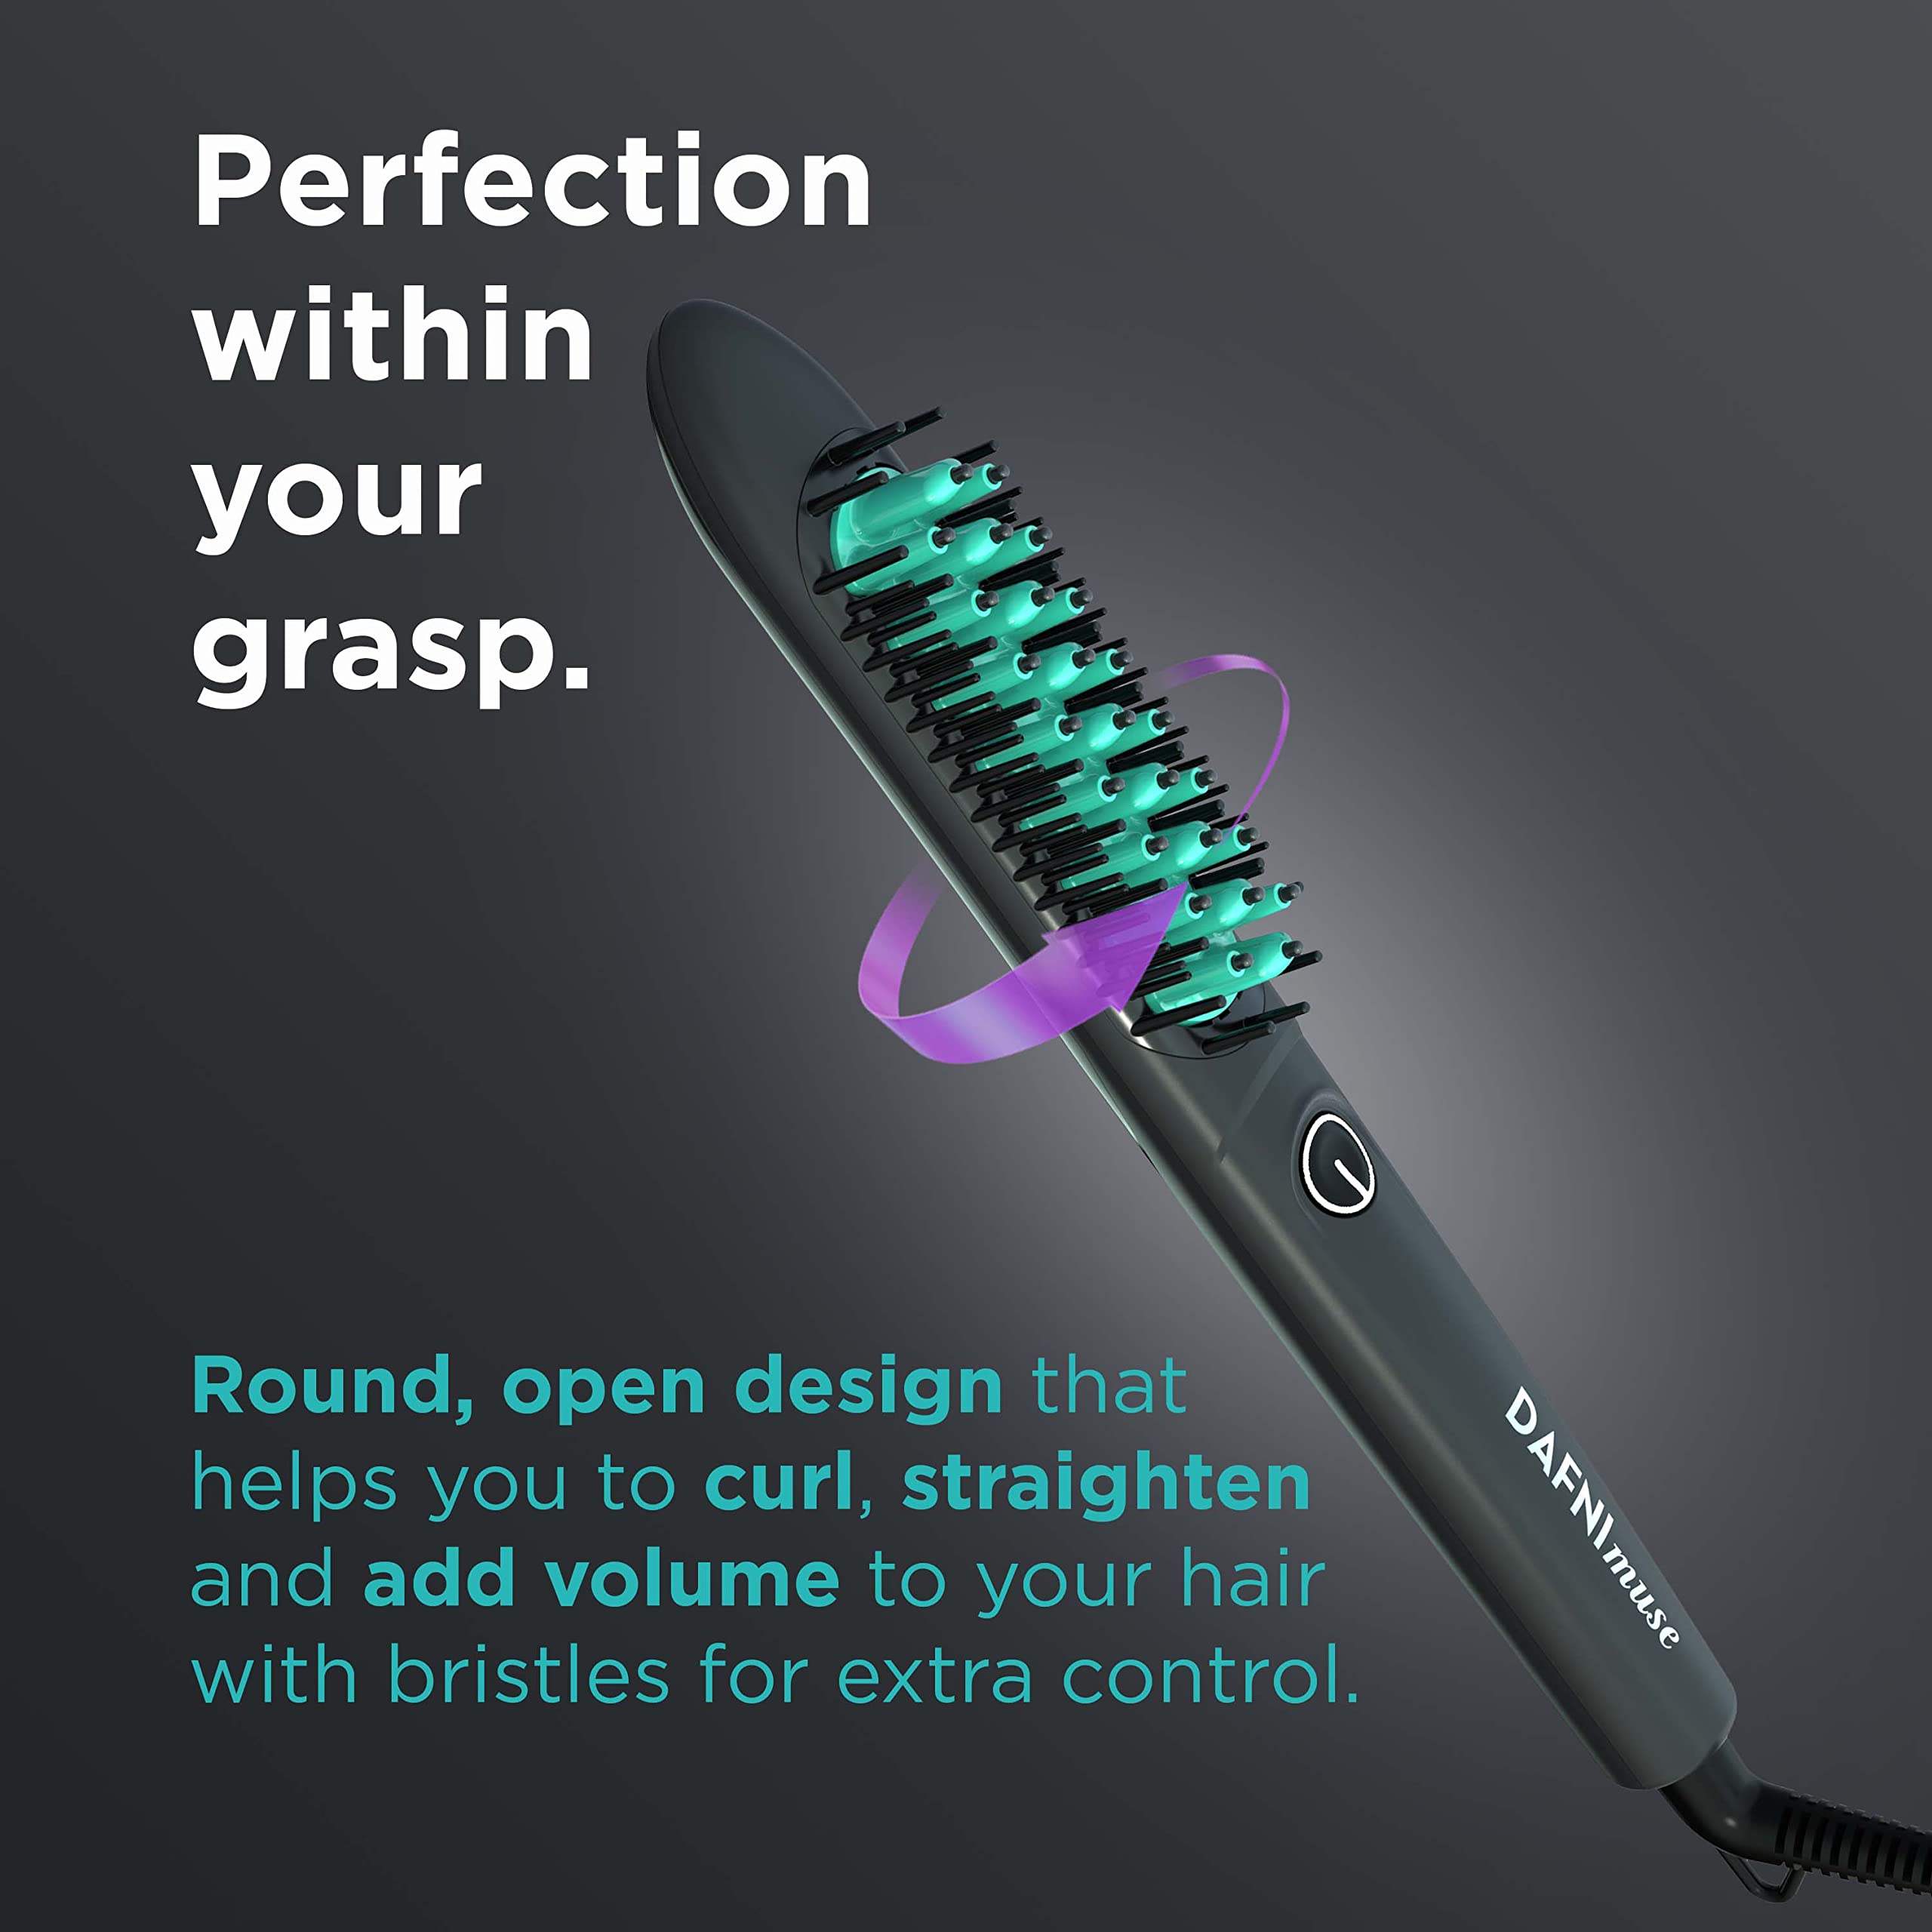 DAFNI X Conair Muse, Smoothing & Styling Hot Brush. Create endless styles from straight to smooth to curly, with or without volume. Best suited for short to mid-length hair